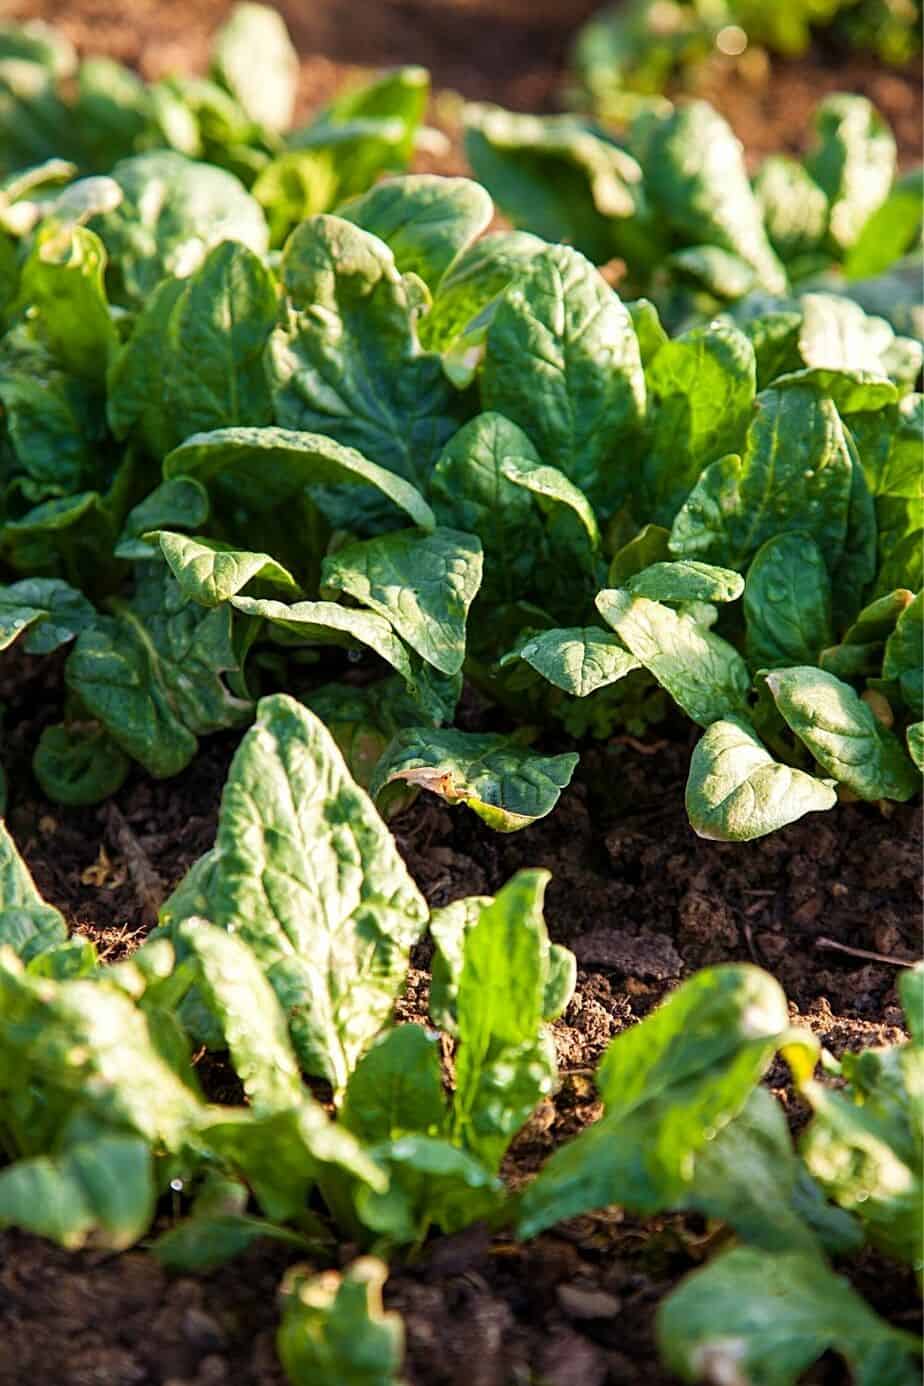 Spinach is a cold-weather plant that you can grow in your northeast-facing garden